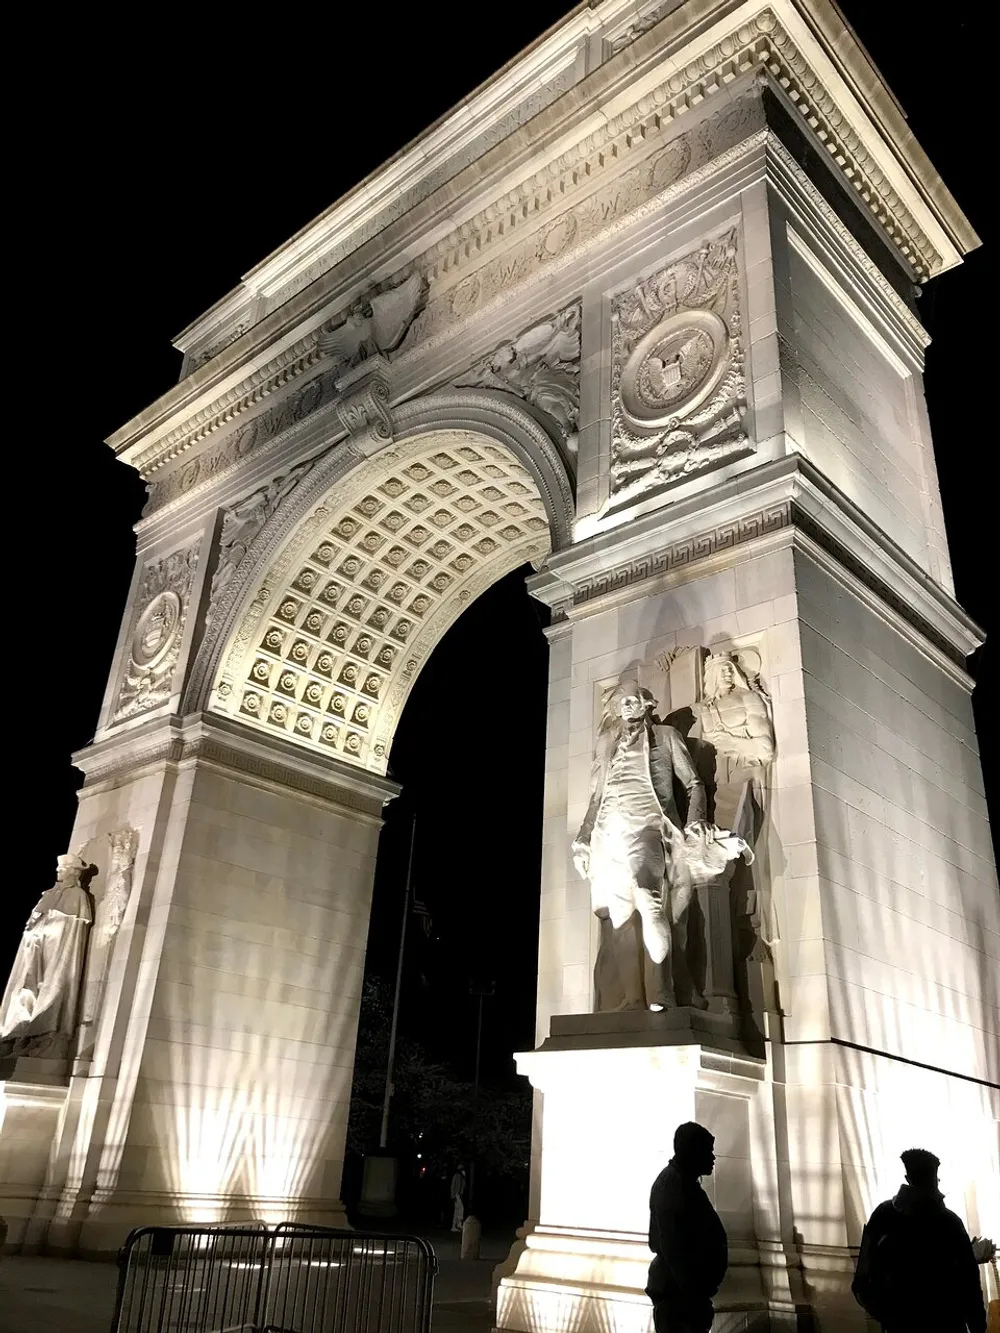 The image shows the Washington Square Arch illuminated at night with sculptures adorning its pillars and people standing in the foreground observing it